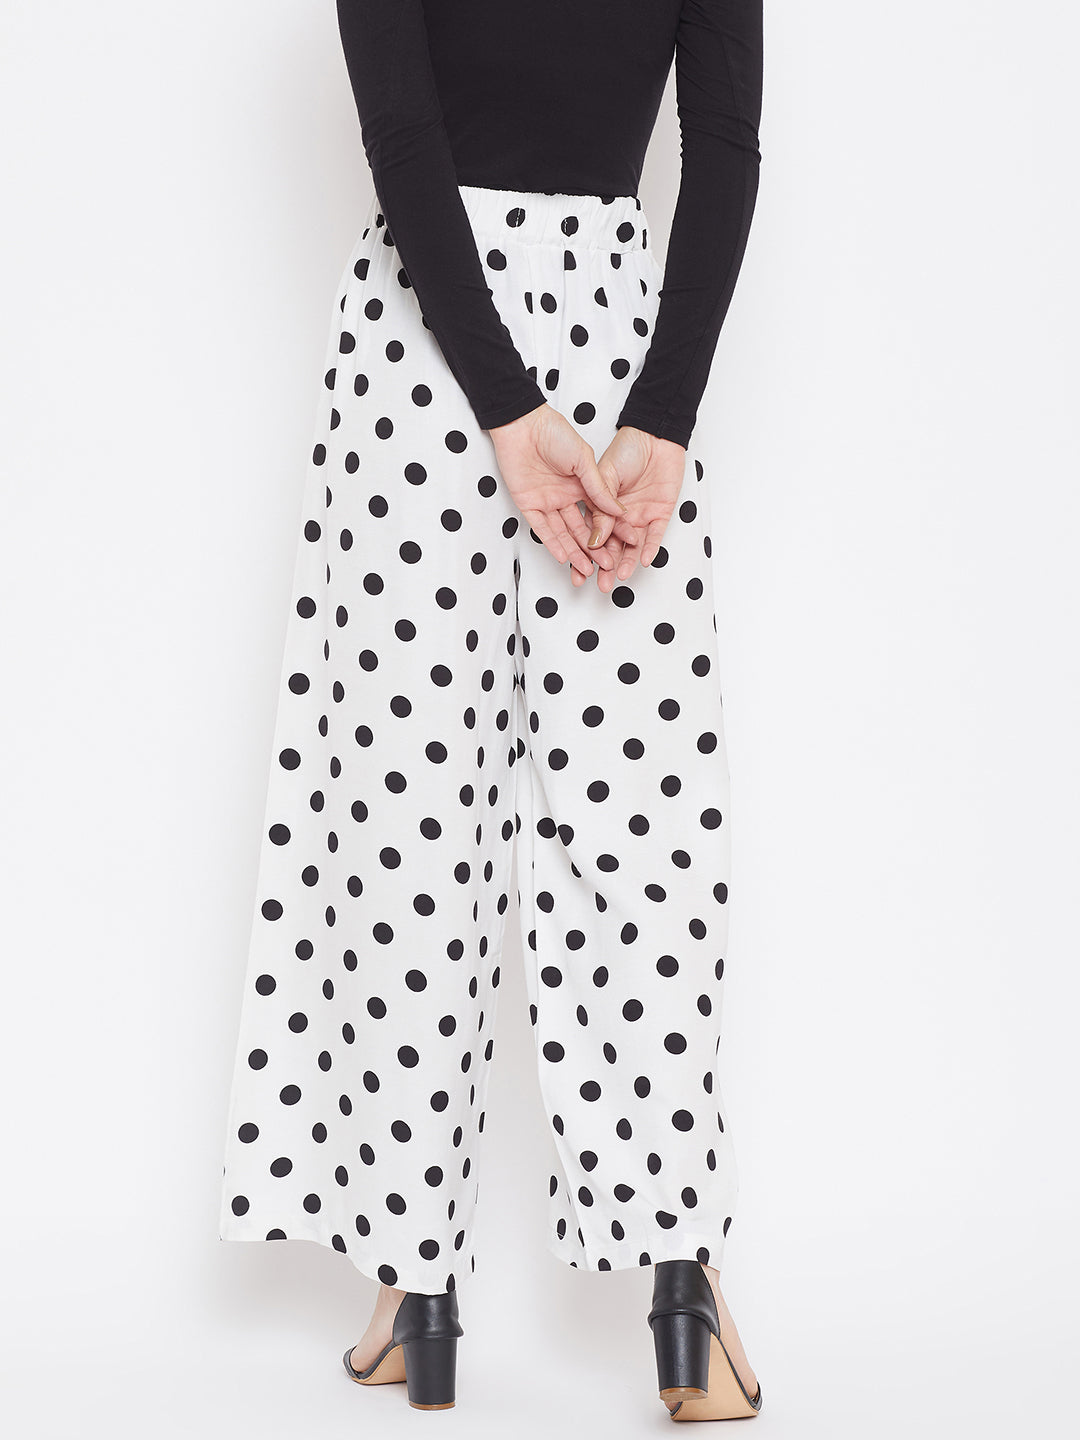 White Printed COMFORT FIT Trousers - Women Trousers